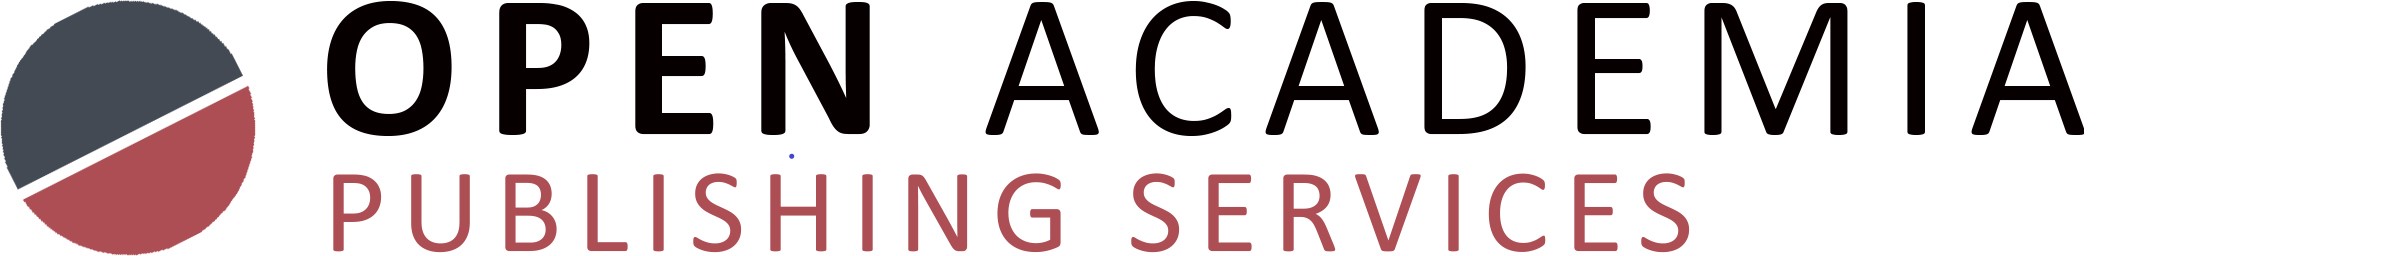 Open Academia logo with link to its website